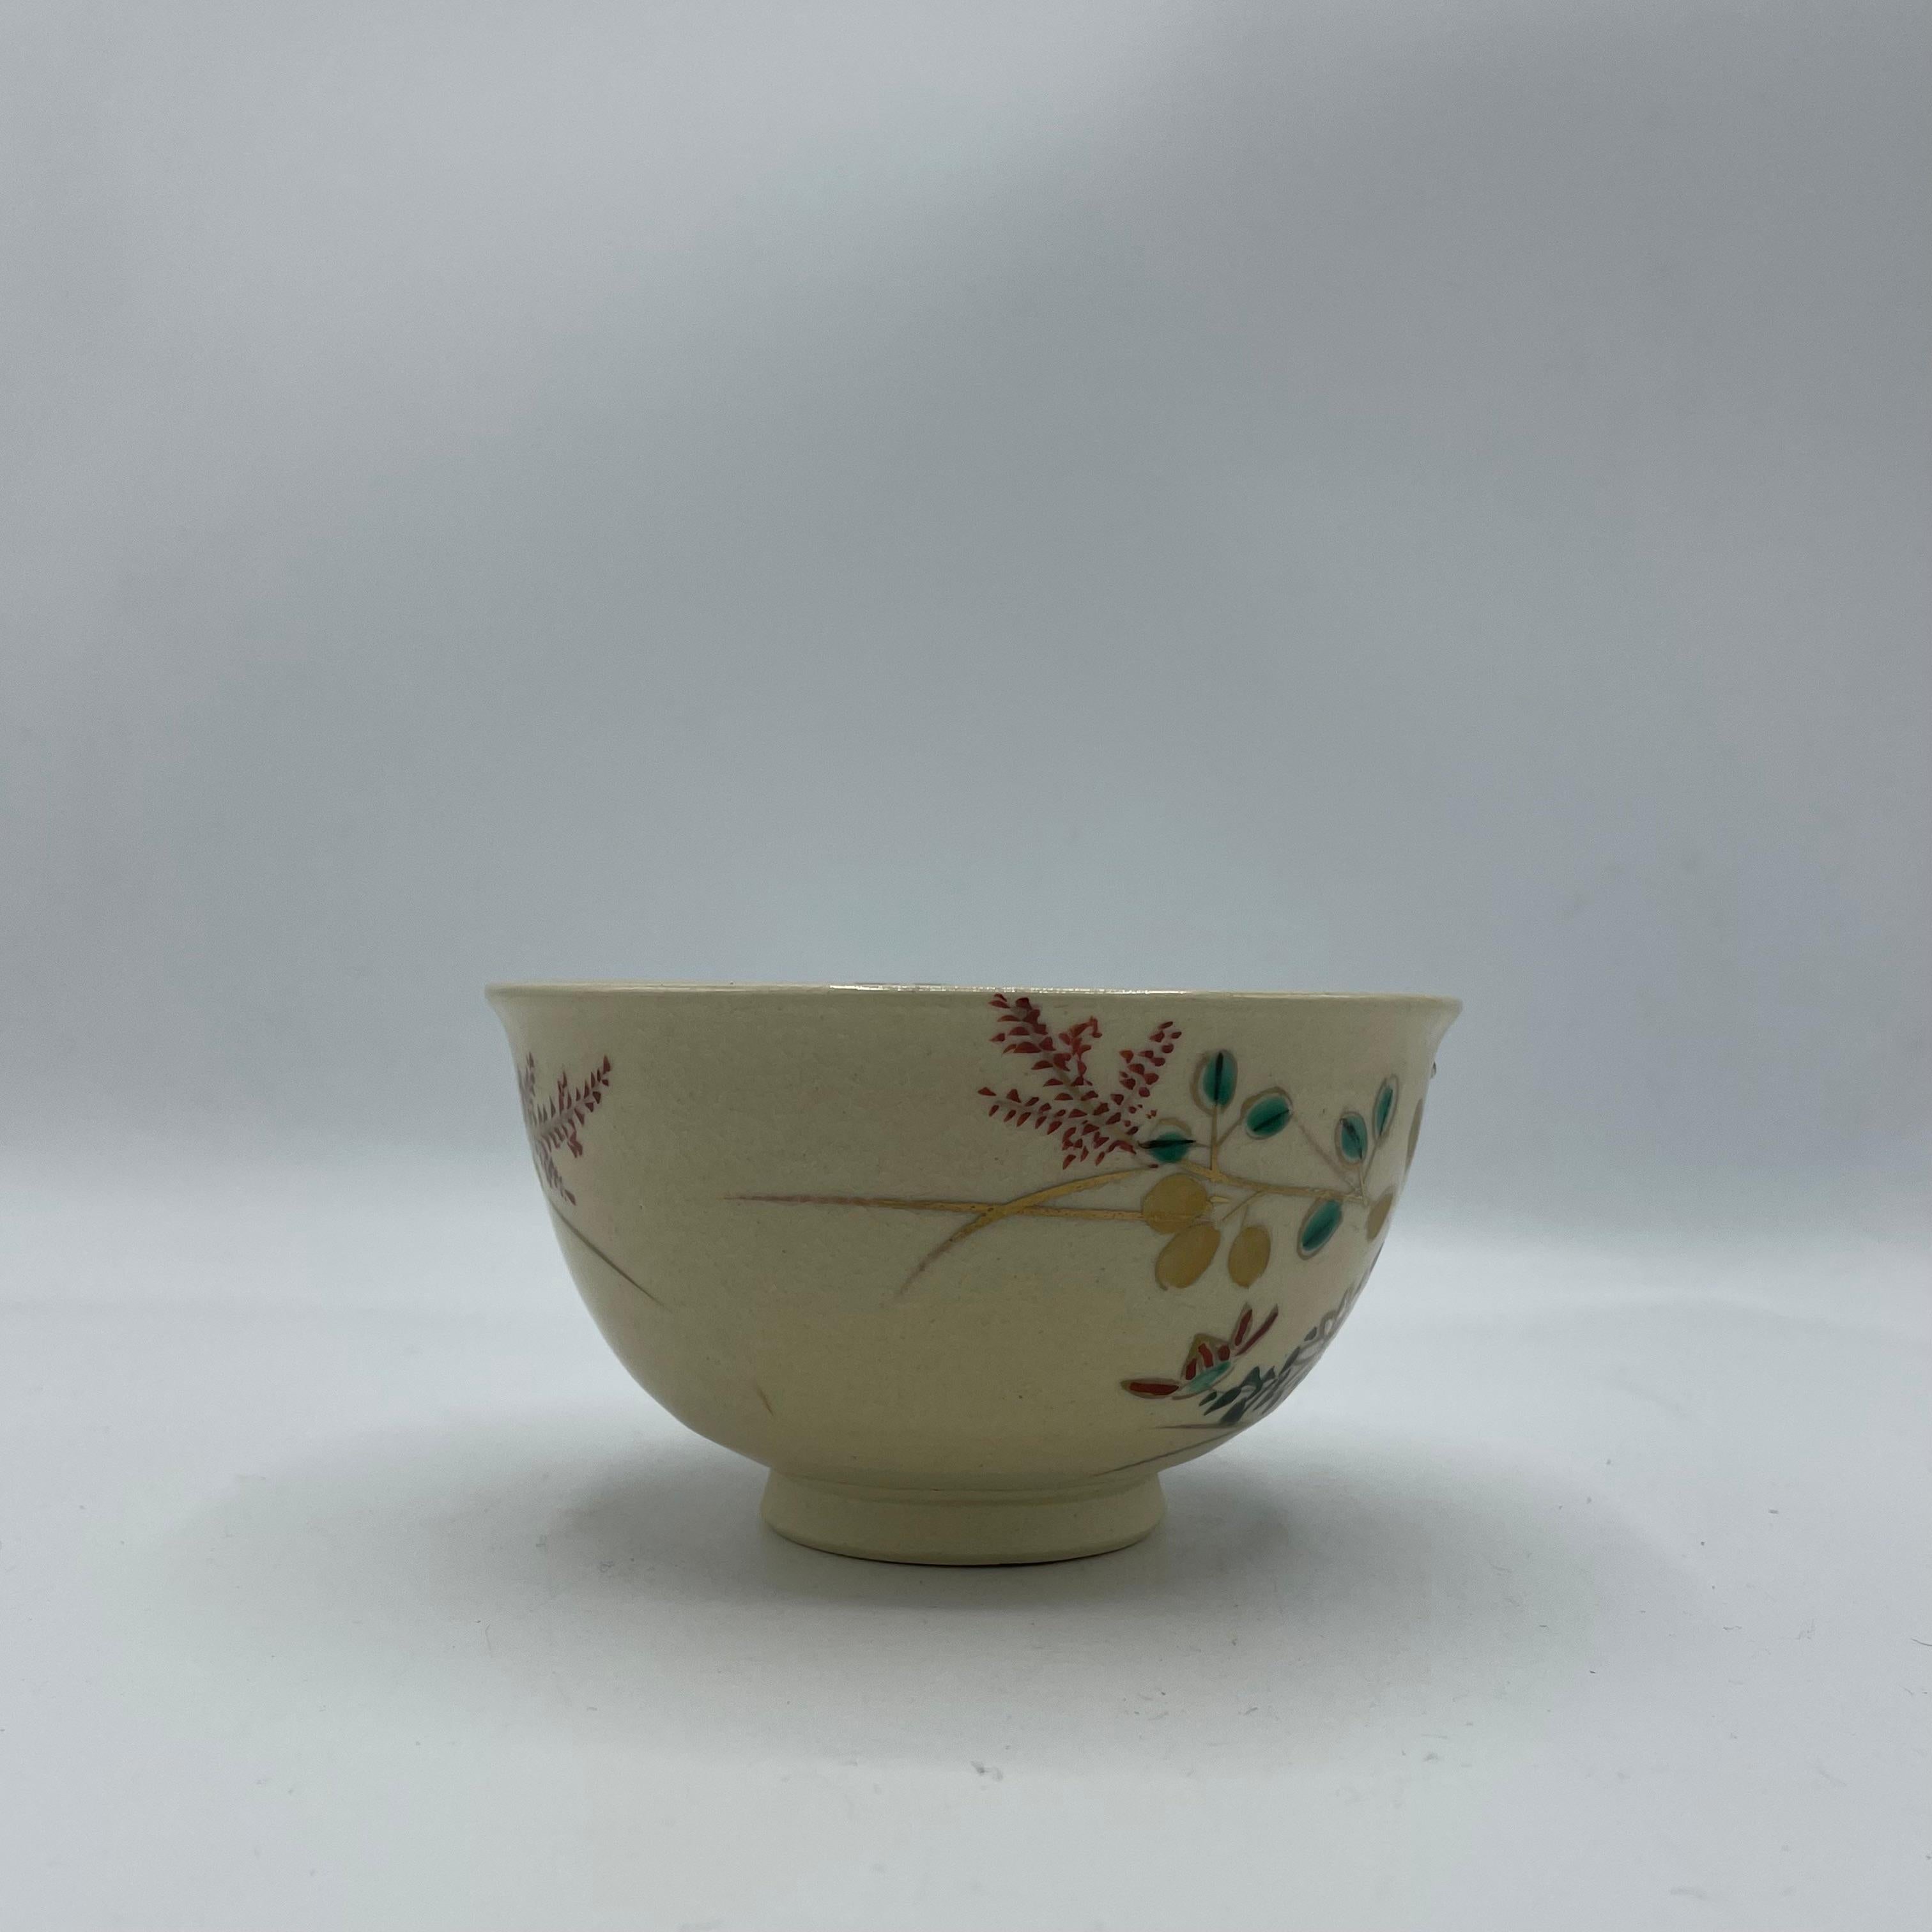 Japanese Matcha Bowl for Tea Ceremony Autumn Leaves Akikusa  Kato Jyosui 1990s In Good Condition For Sale In Paris, FR